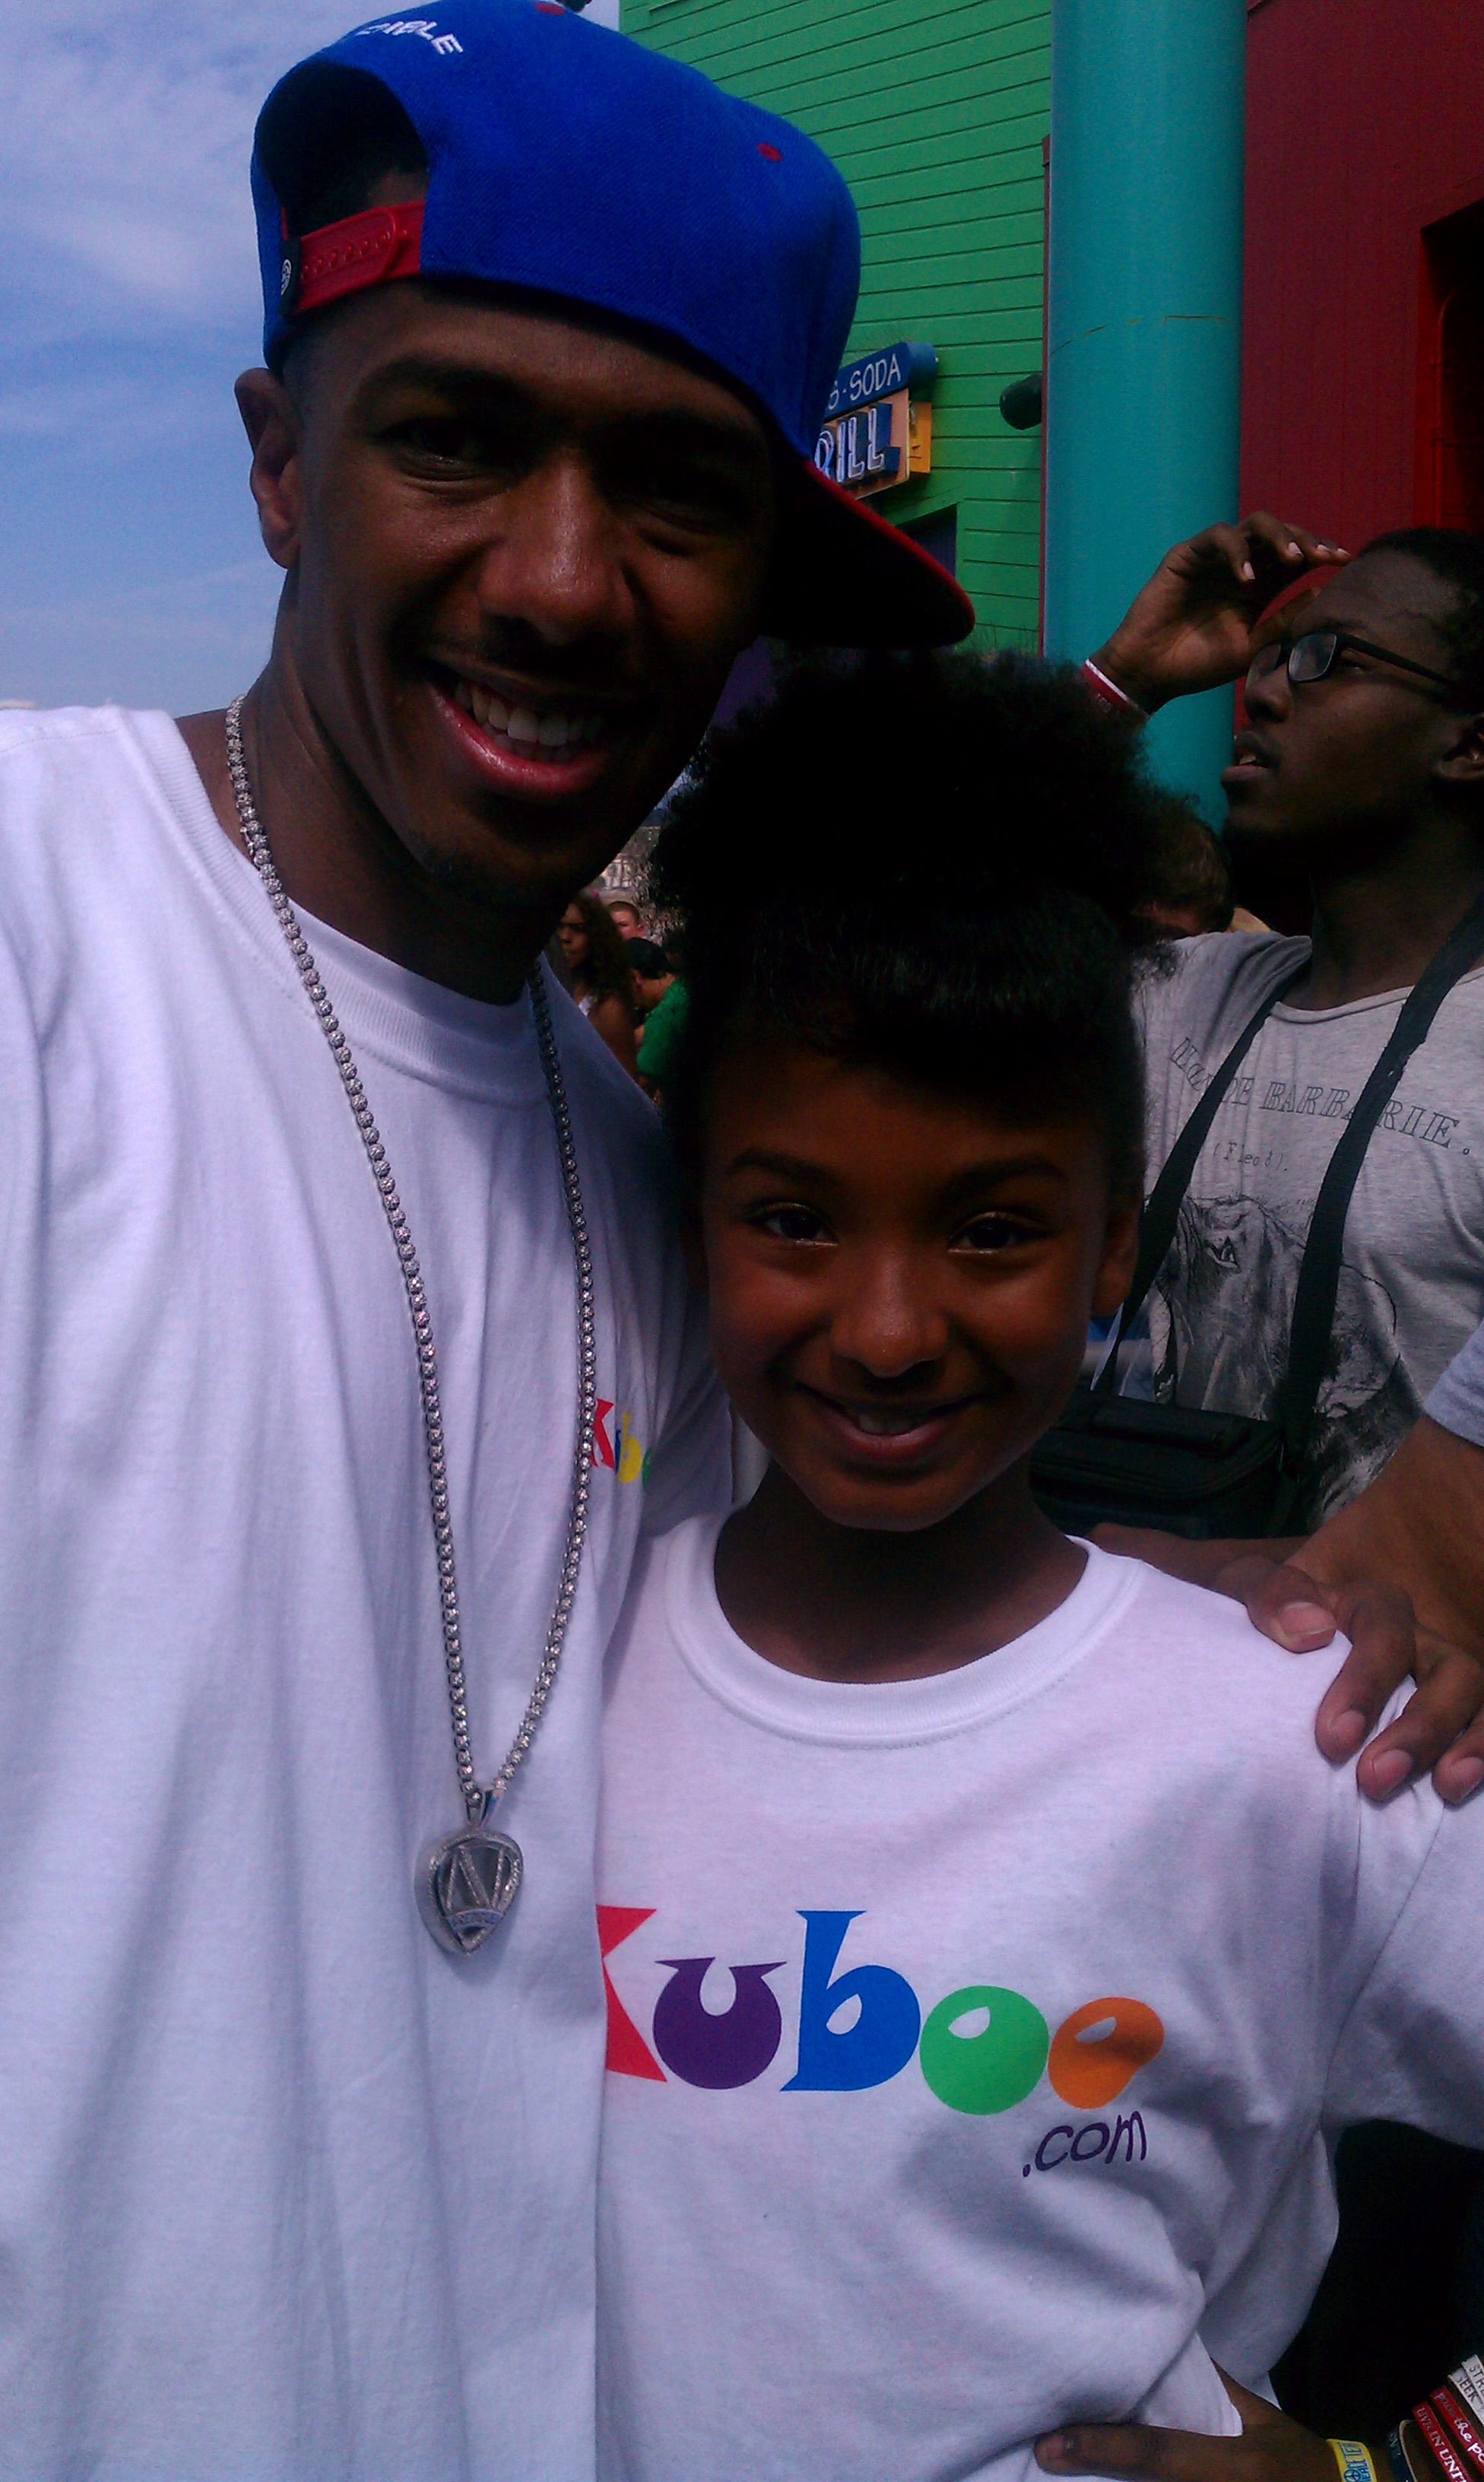 nick cannon and nay nay at Kuboo event on the pier,nay nay performed her song.